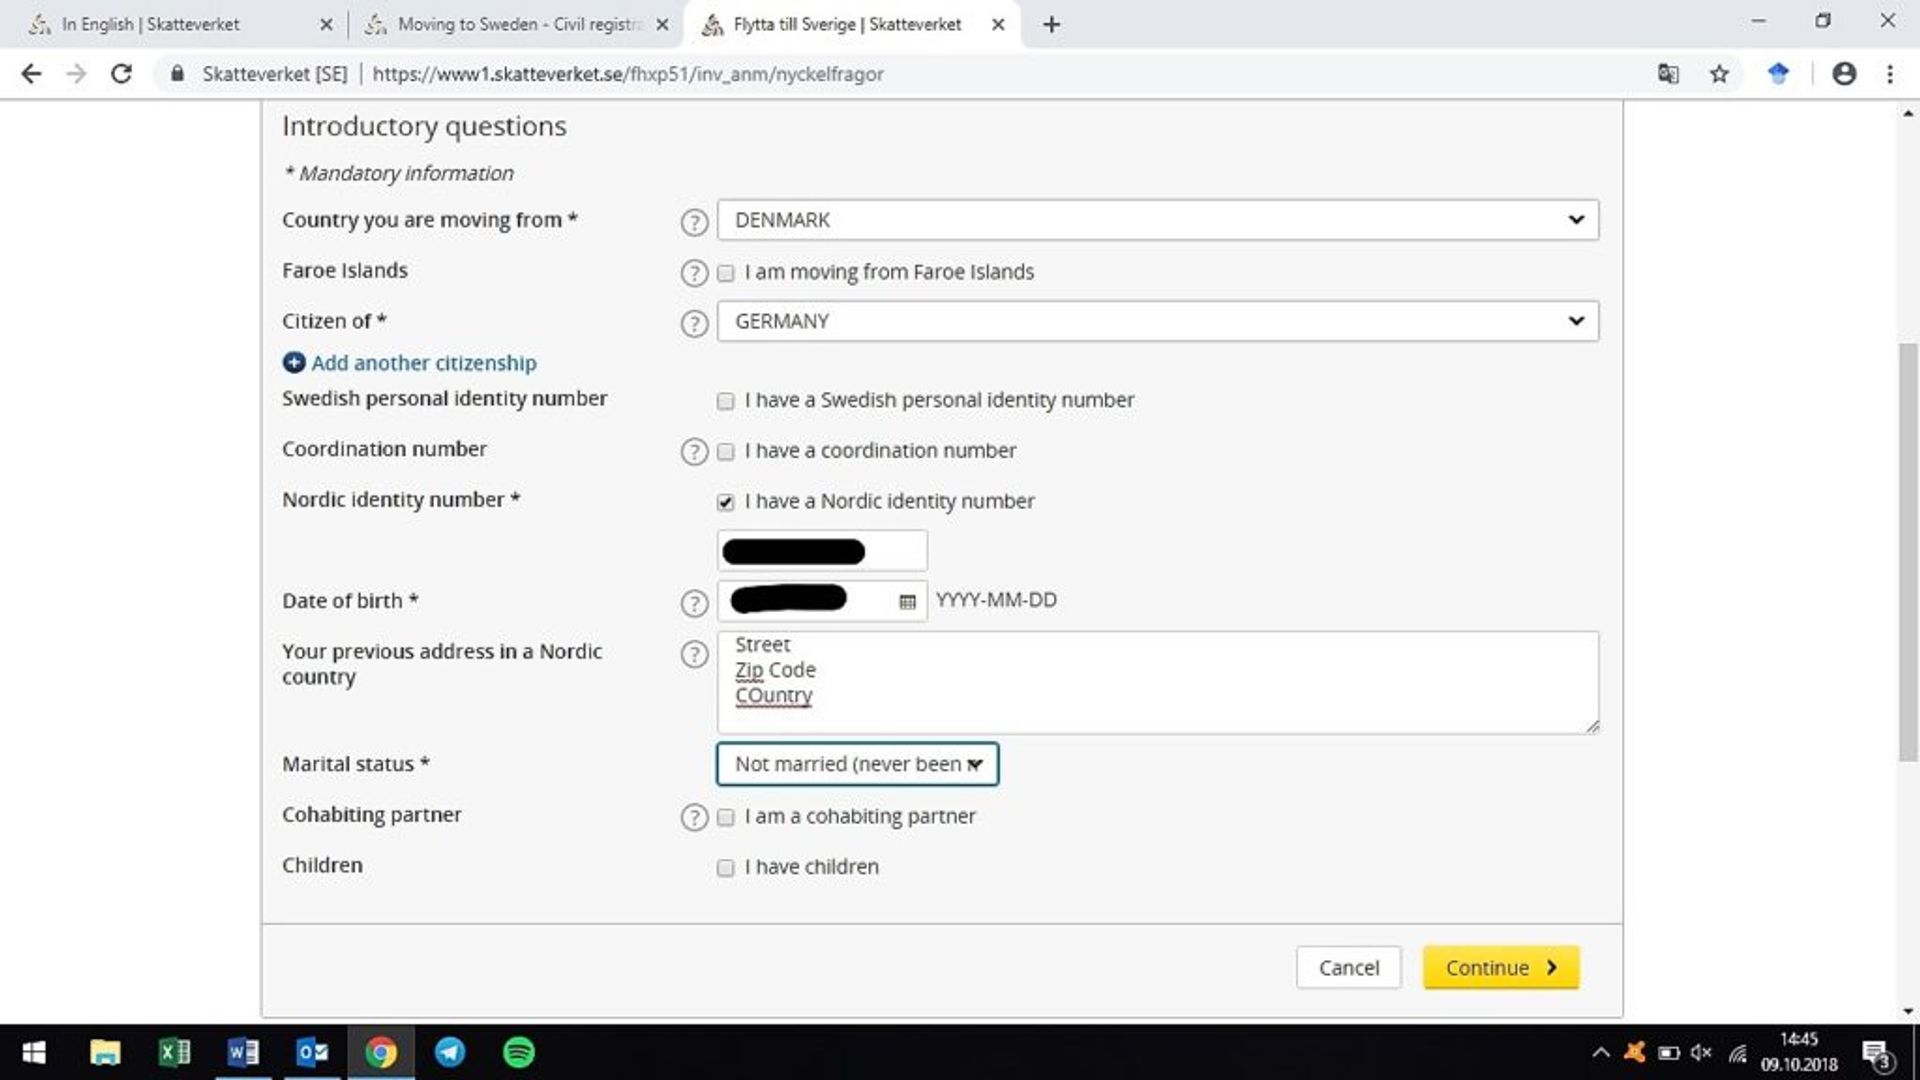 Screenshot of online application form - introductory questions.